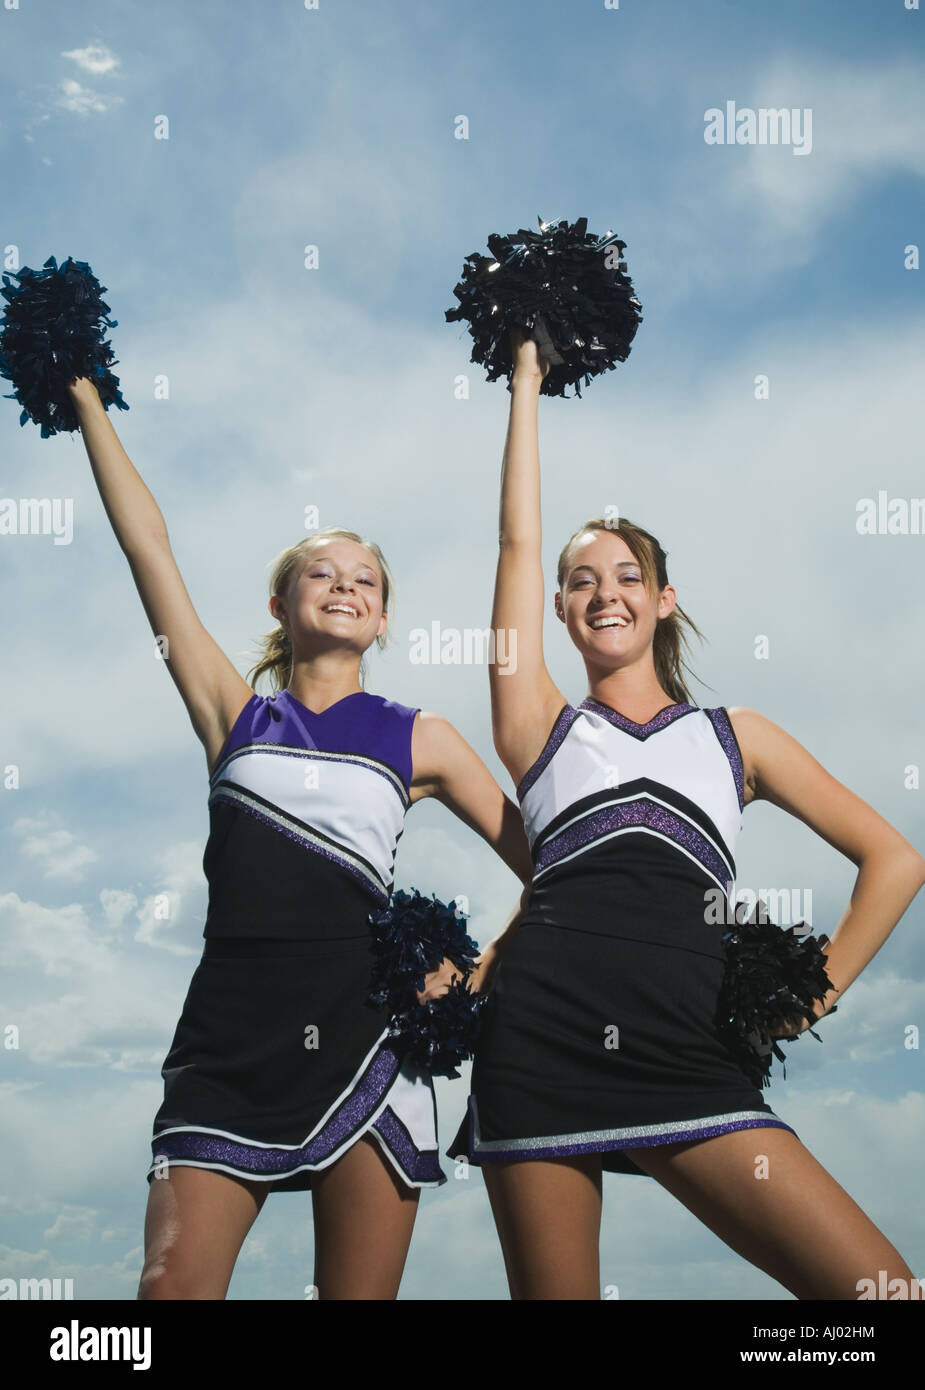 2+ Thousand Cheerleader Pompons Royalty-Free Images, Stock Photos